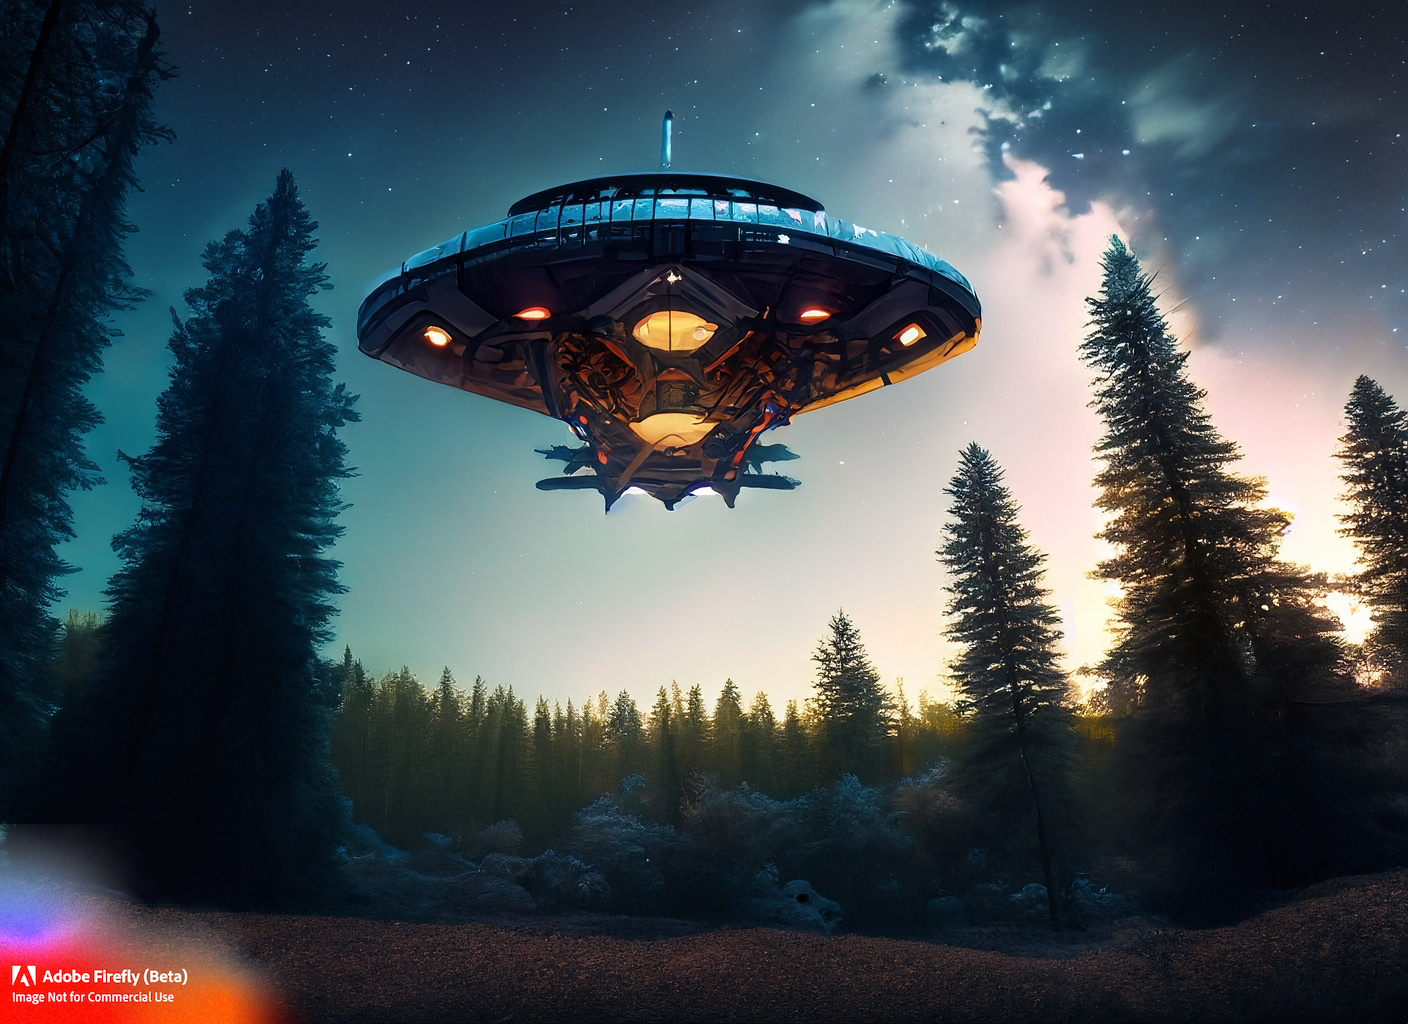 Firefly spaceship hovering in the Scandinavian forest night sky 67281-